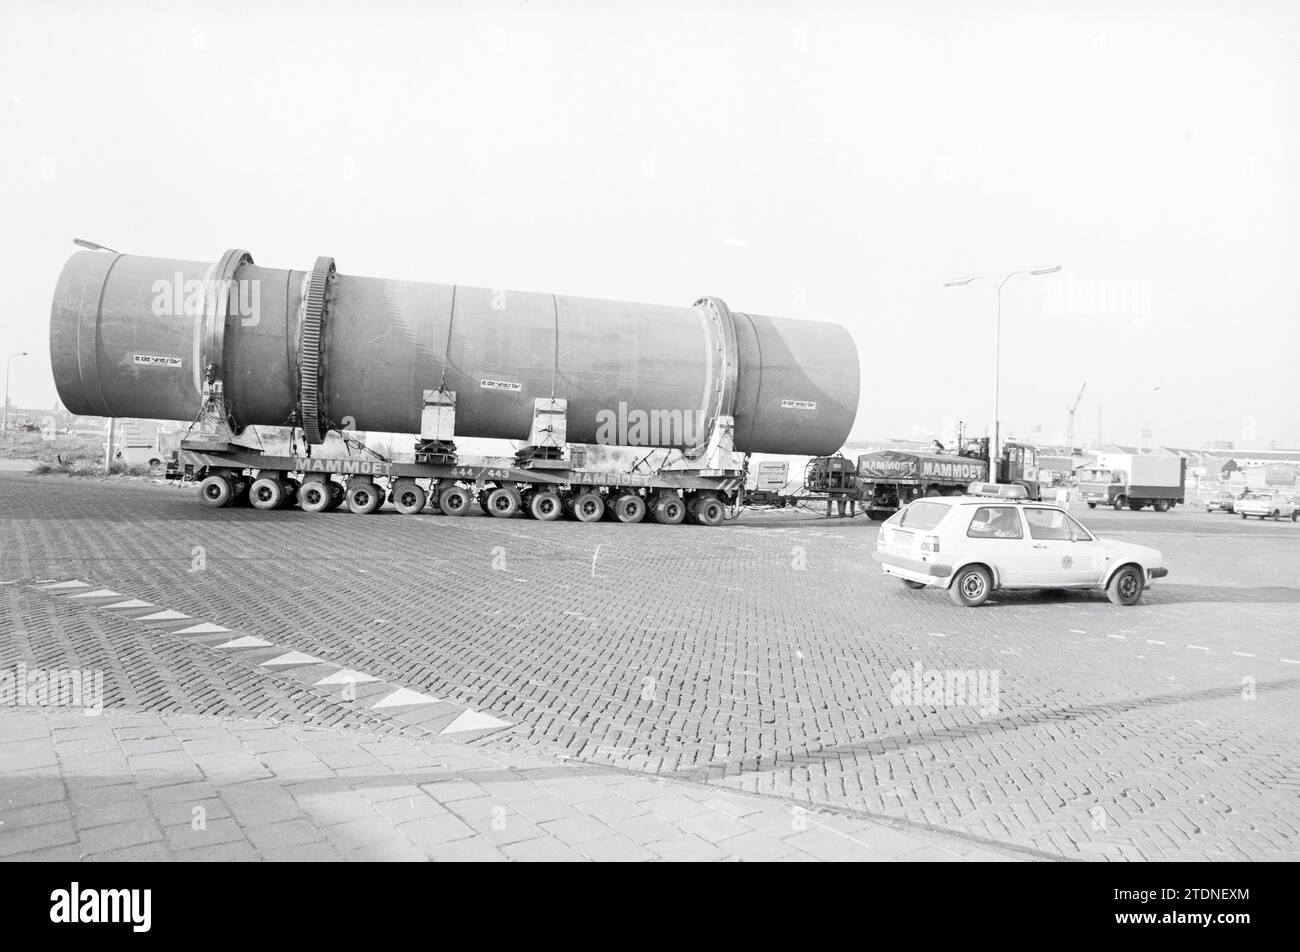 Supertransport IJmuiden, enormous tube on a twelve-axle trailer, IJmuiden, The Netherlands, 12-02-1985, Whizgle News from the Past, Tailored for the Future. Explore historical narratives, Dutch The Netherlands agency image with a modern perspective, bridging the gap between yesterday's events and tomorrow's insights. A timeless journey shaping the stories that shape our future Stock Photo